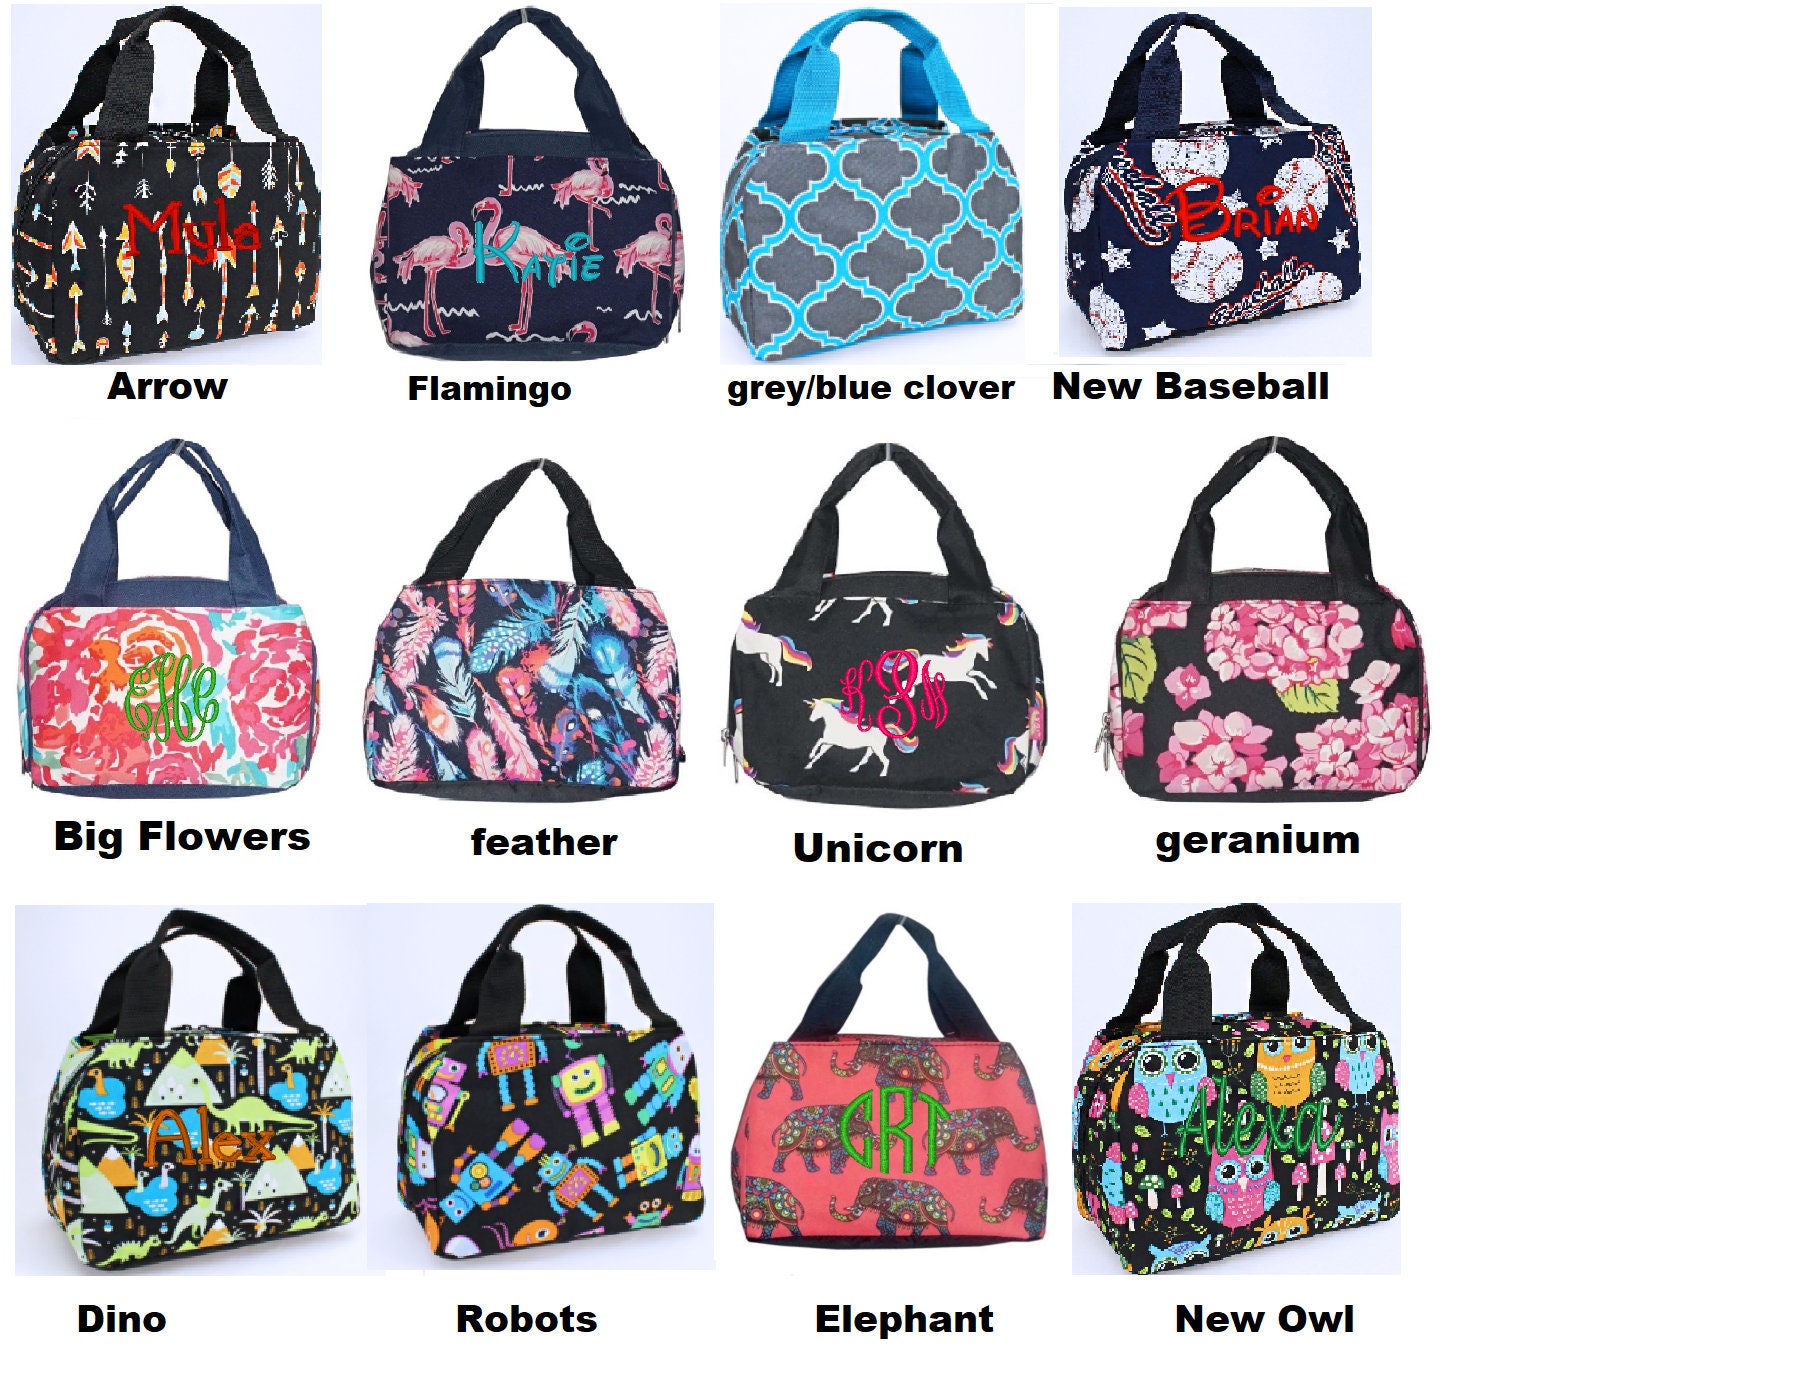 Personalized Lunch bags in New ColorsChevron colorsOwl